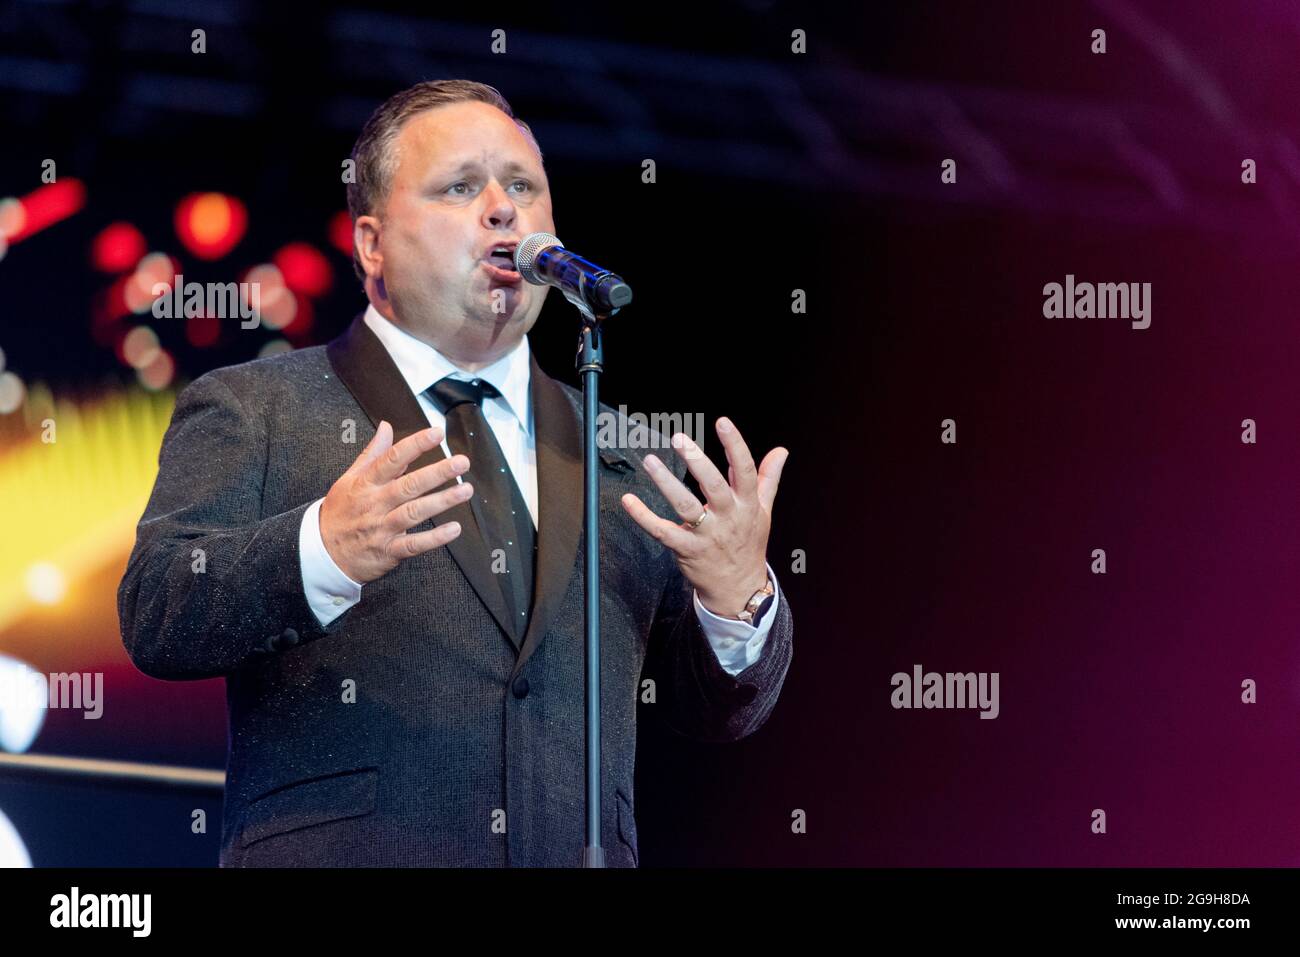 Paul Potts performing on stage in Maldon, Essex, UK. Welsh male operatic tenor singer, singing with the London Concert Orchestra after COVID lockdown Stock Photo